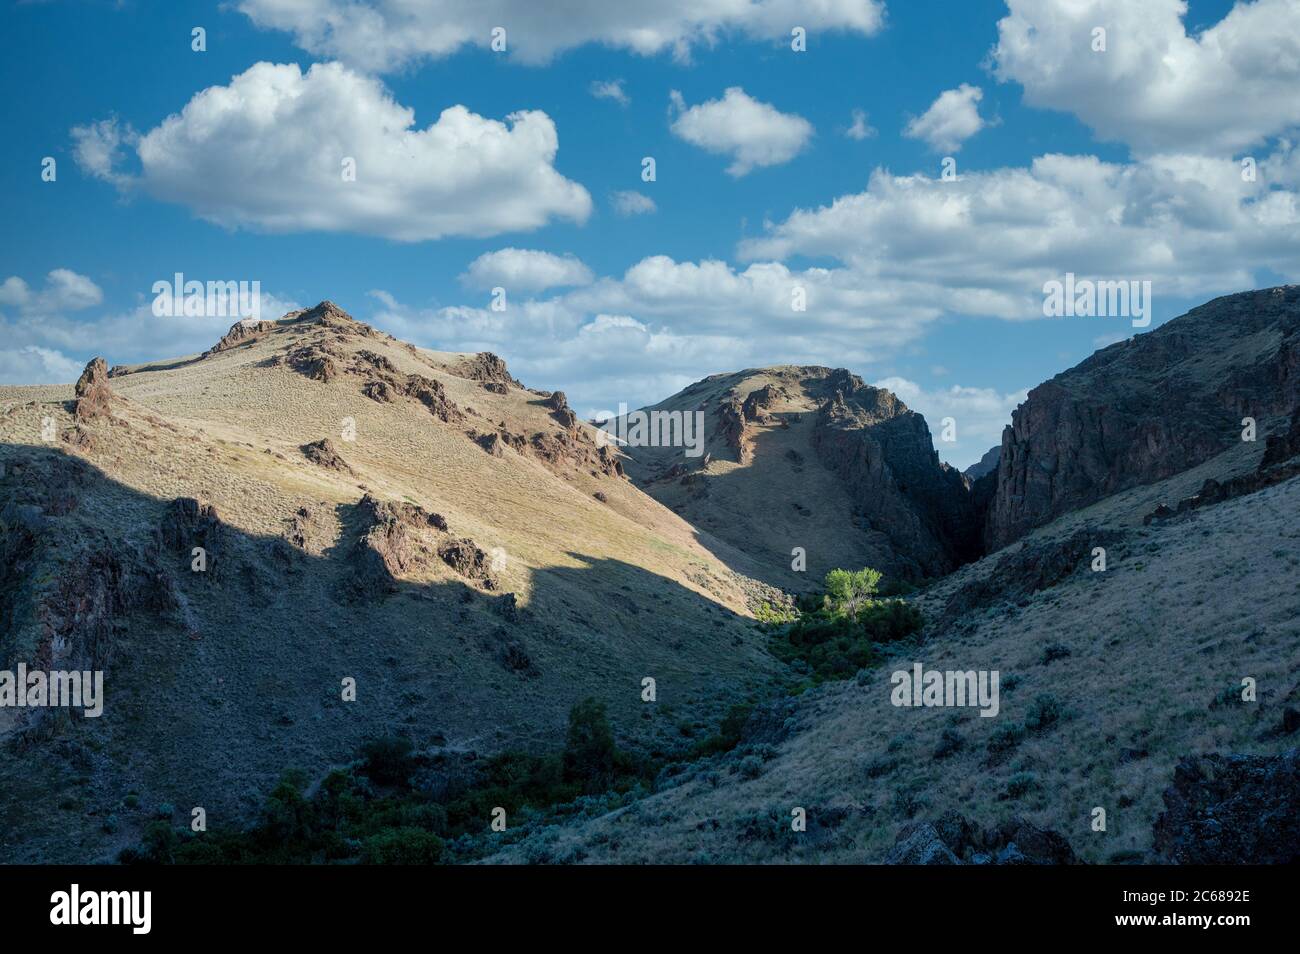 Rock formations with sage brush Stock Photo